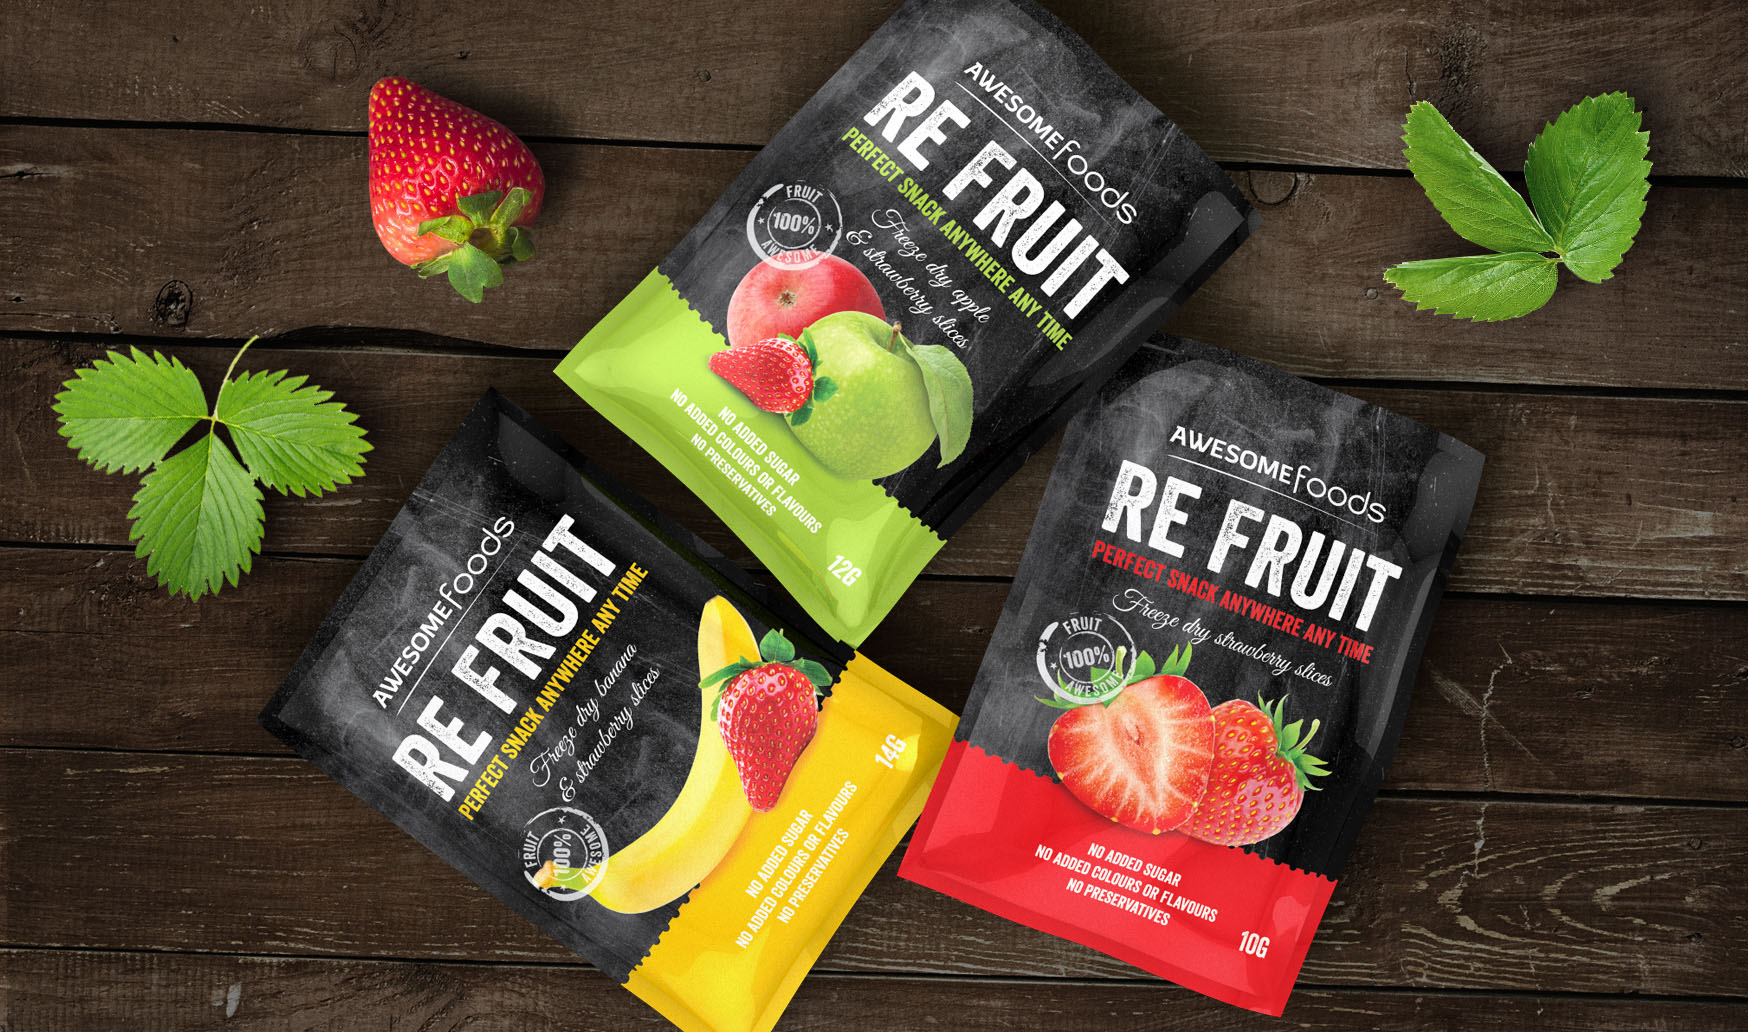 re-fruit-packaging-design-product-label-design-branding-logo-visual-identity-food-fmcg-product-line-ready-meal-snack-packaging-design-freeze-dry-vegan-graphic-design